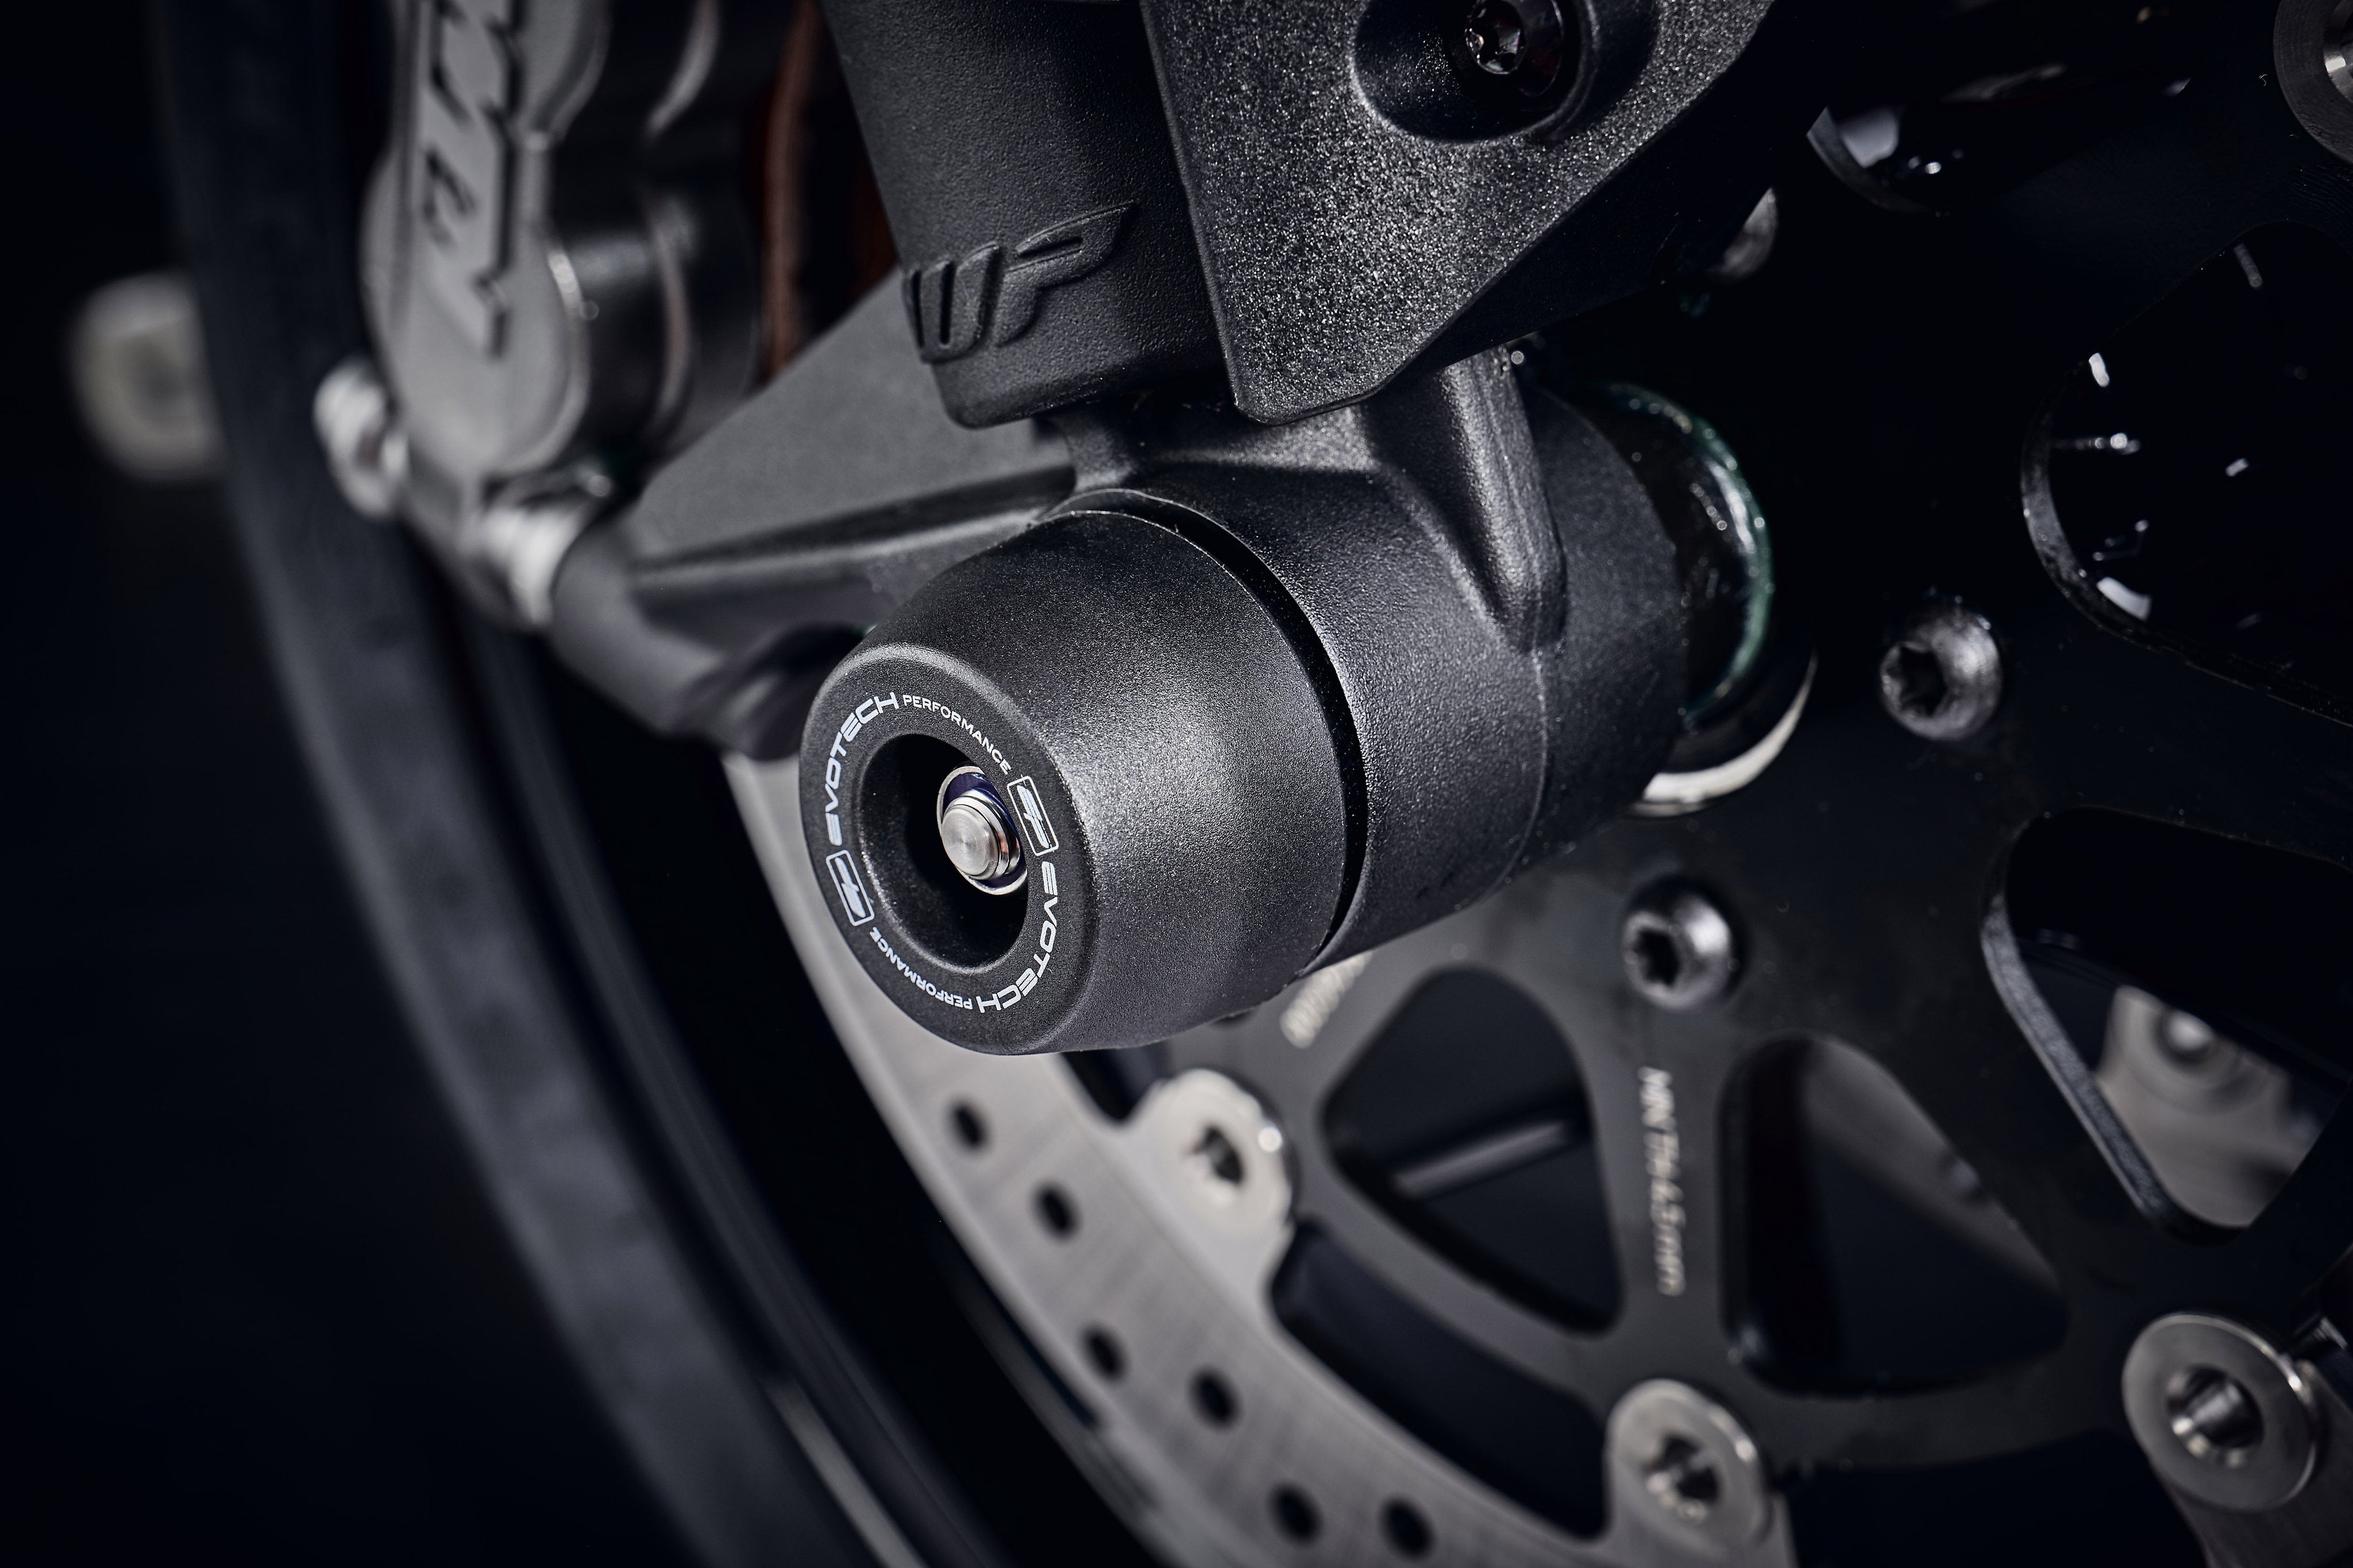 The injection-moulded nylon crash bung of EP Front Spindle Bobbins installed onto the front wheel of the KTM 890 Duke R, giving strong crash protection to the front forks and brake calipers.